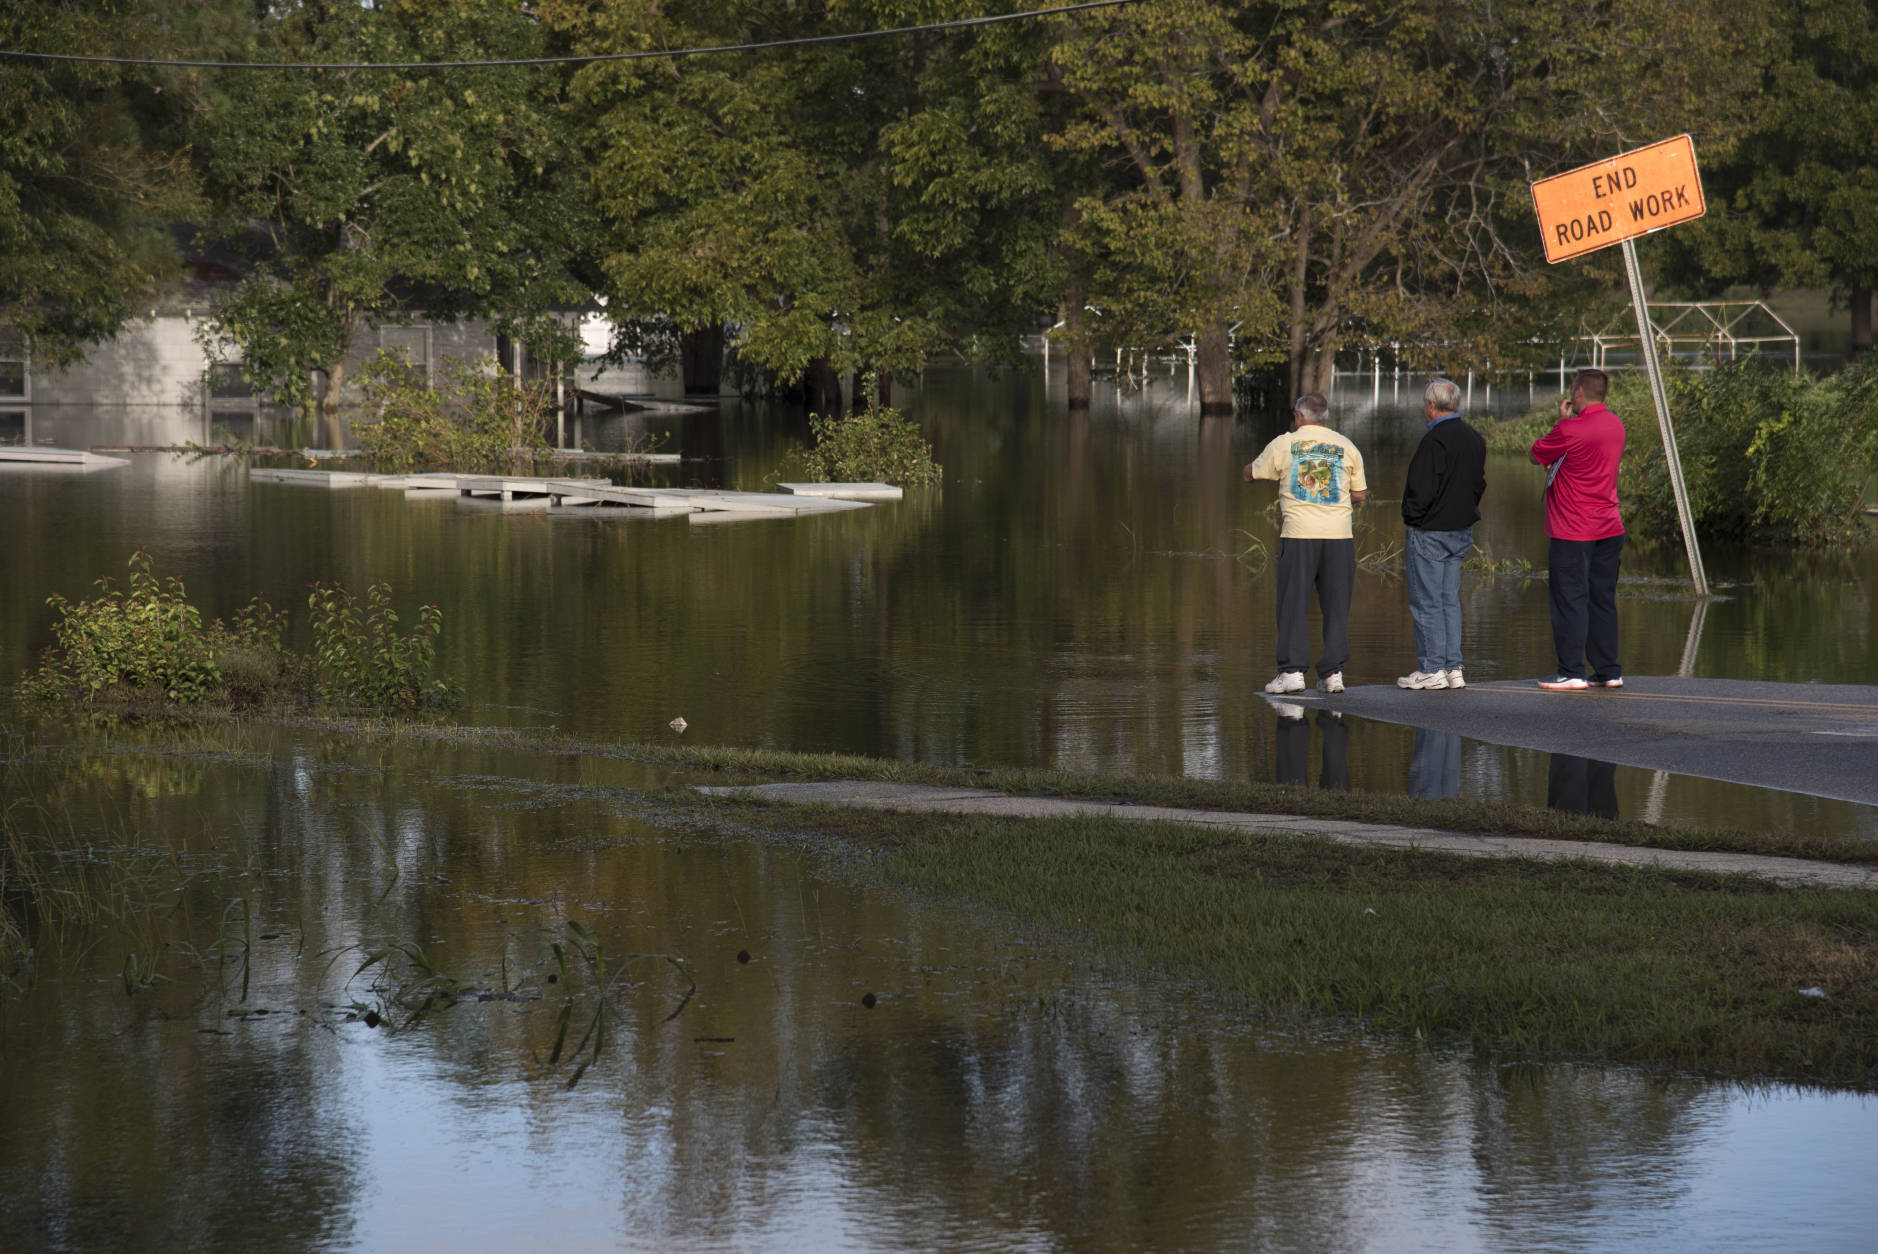 People look out towards West 5th Street that is covered by floodwaters caused by rain from Hurricane in Lumberton, N.C., Wednesday, Oct. 12, 2016. Gov. Pat McCrory says more damage is still to come for many people in the eastern part of North Carolina as the state faces its ninth day of Hurricane Matthew's aftermath.
(AP Photo/Mike Spencer)